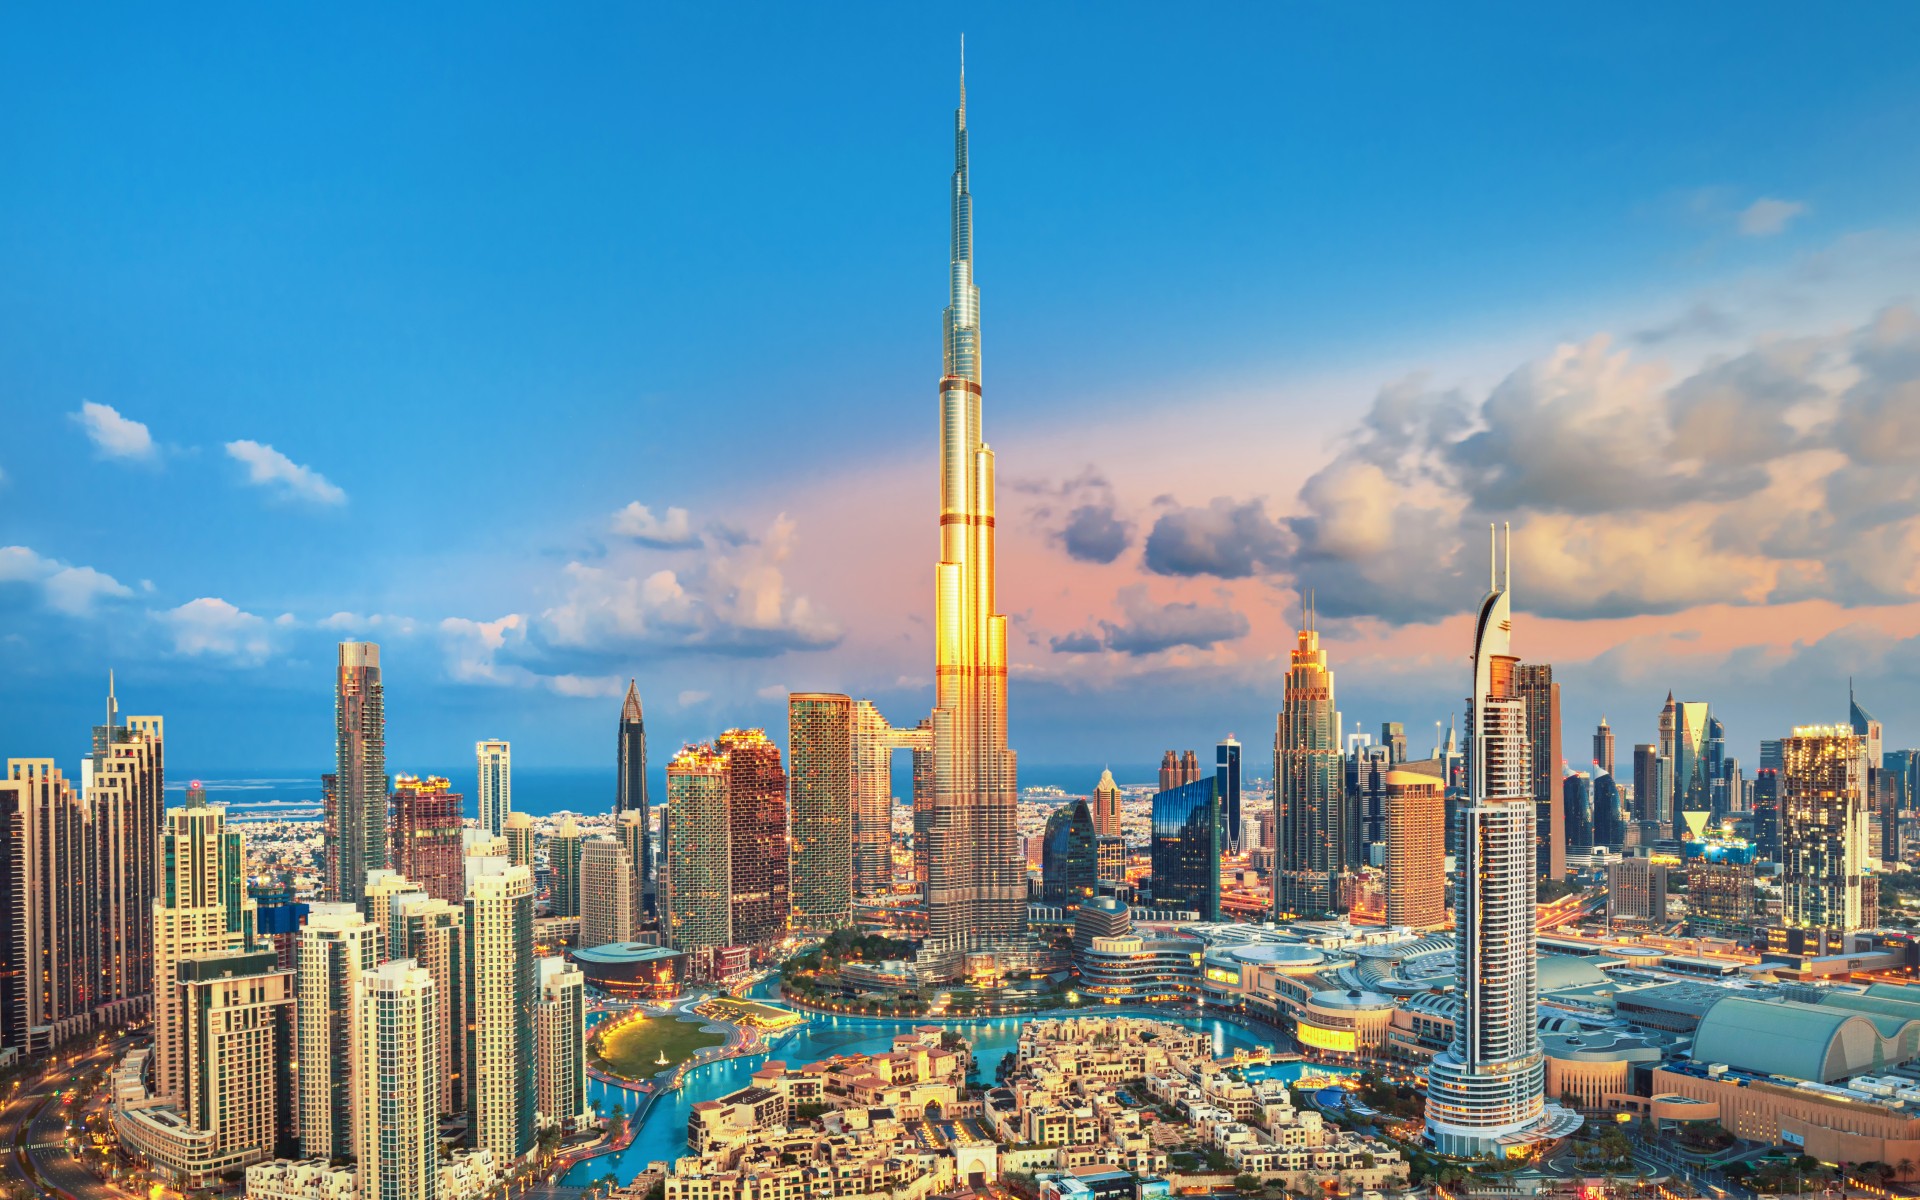 What Are the Most Popular Sectors for Starting a Business in Dubai?